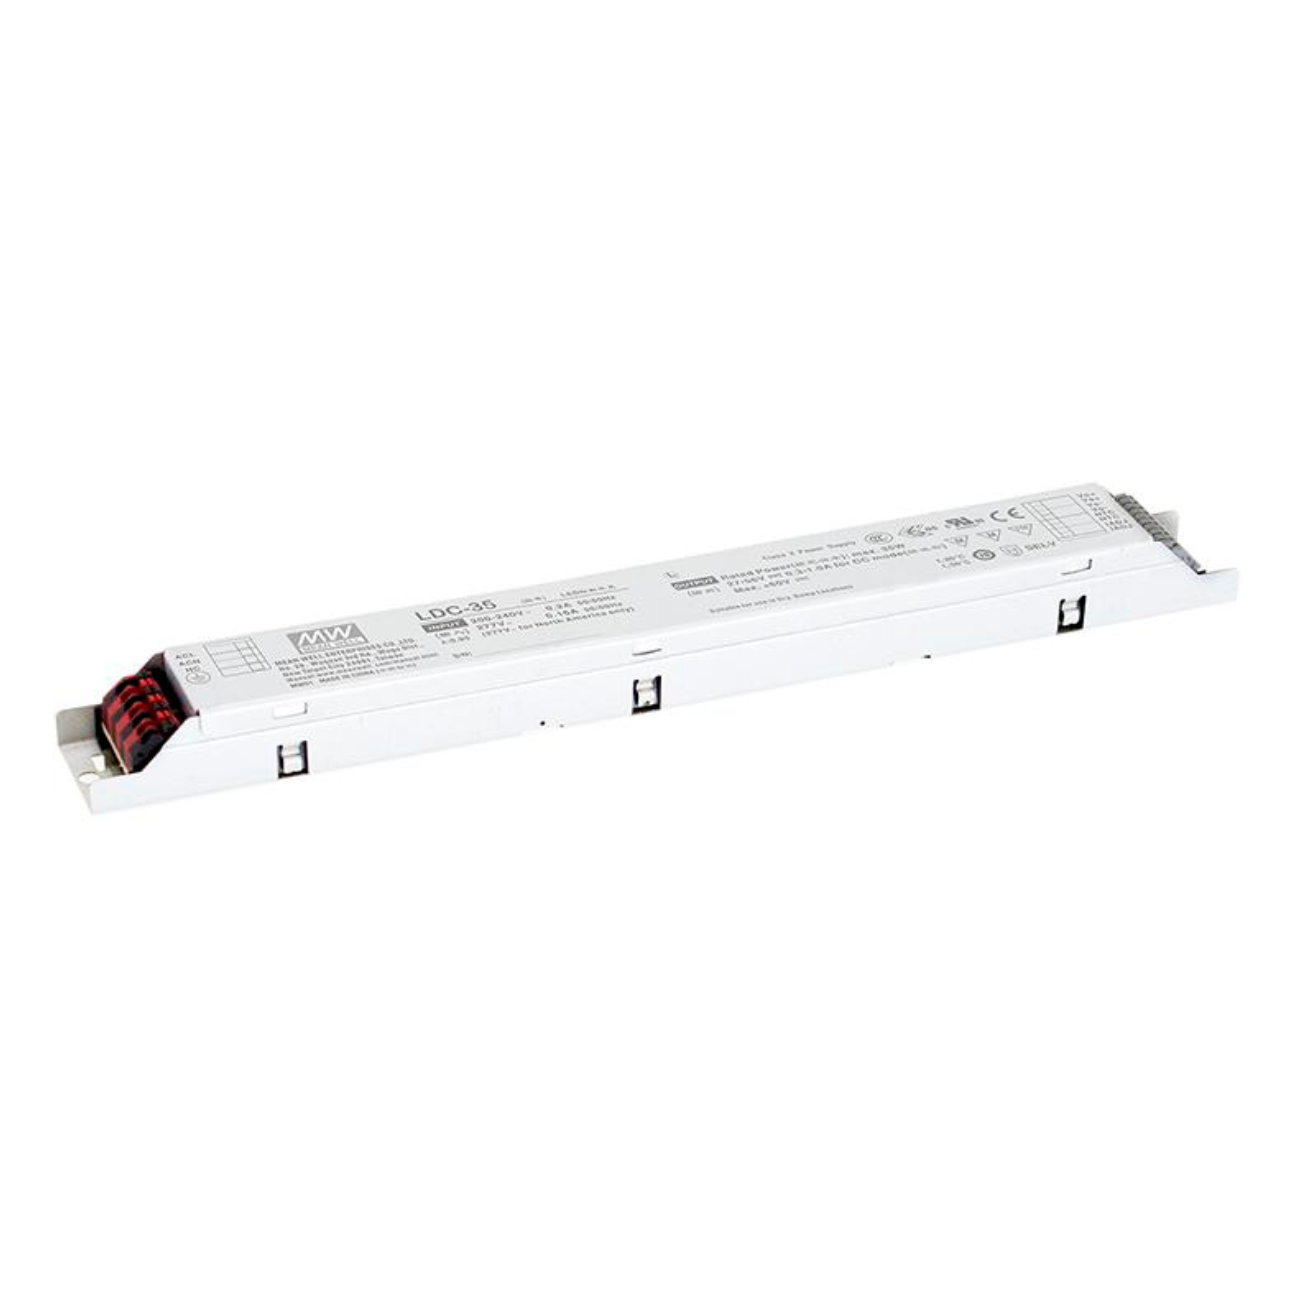 Dimmbares MeanWell LDC-35B (35W/27-56V) LED-Netzteil (3-in-1-Dimmung)